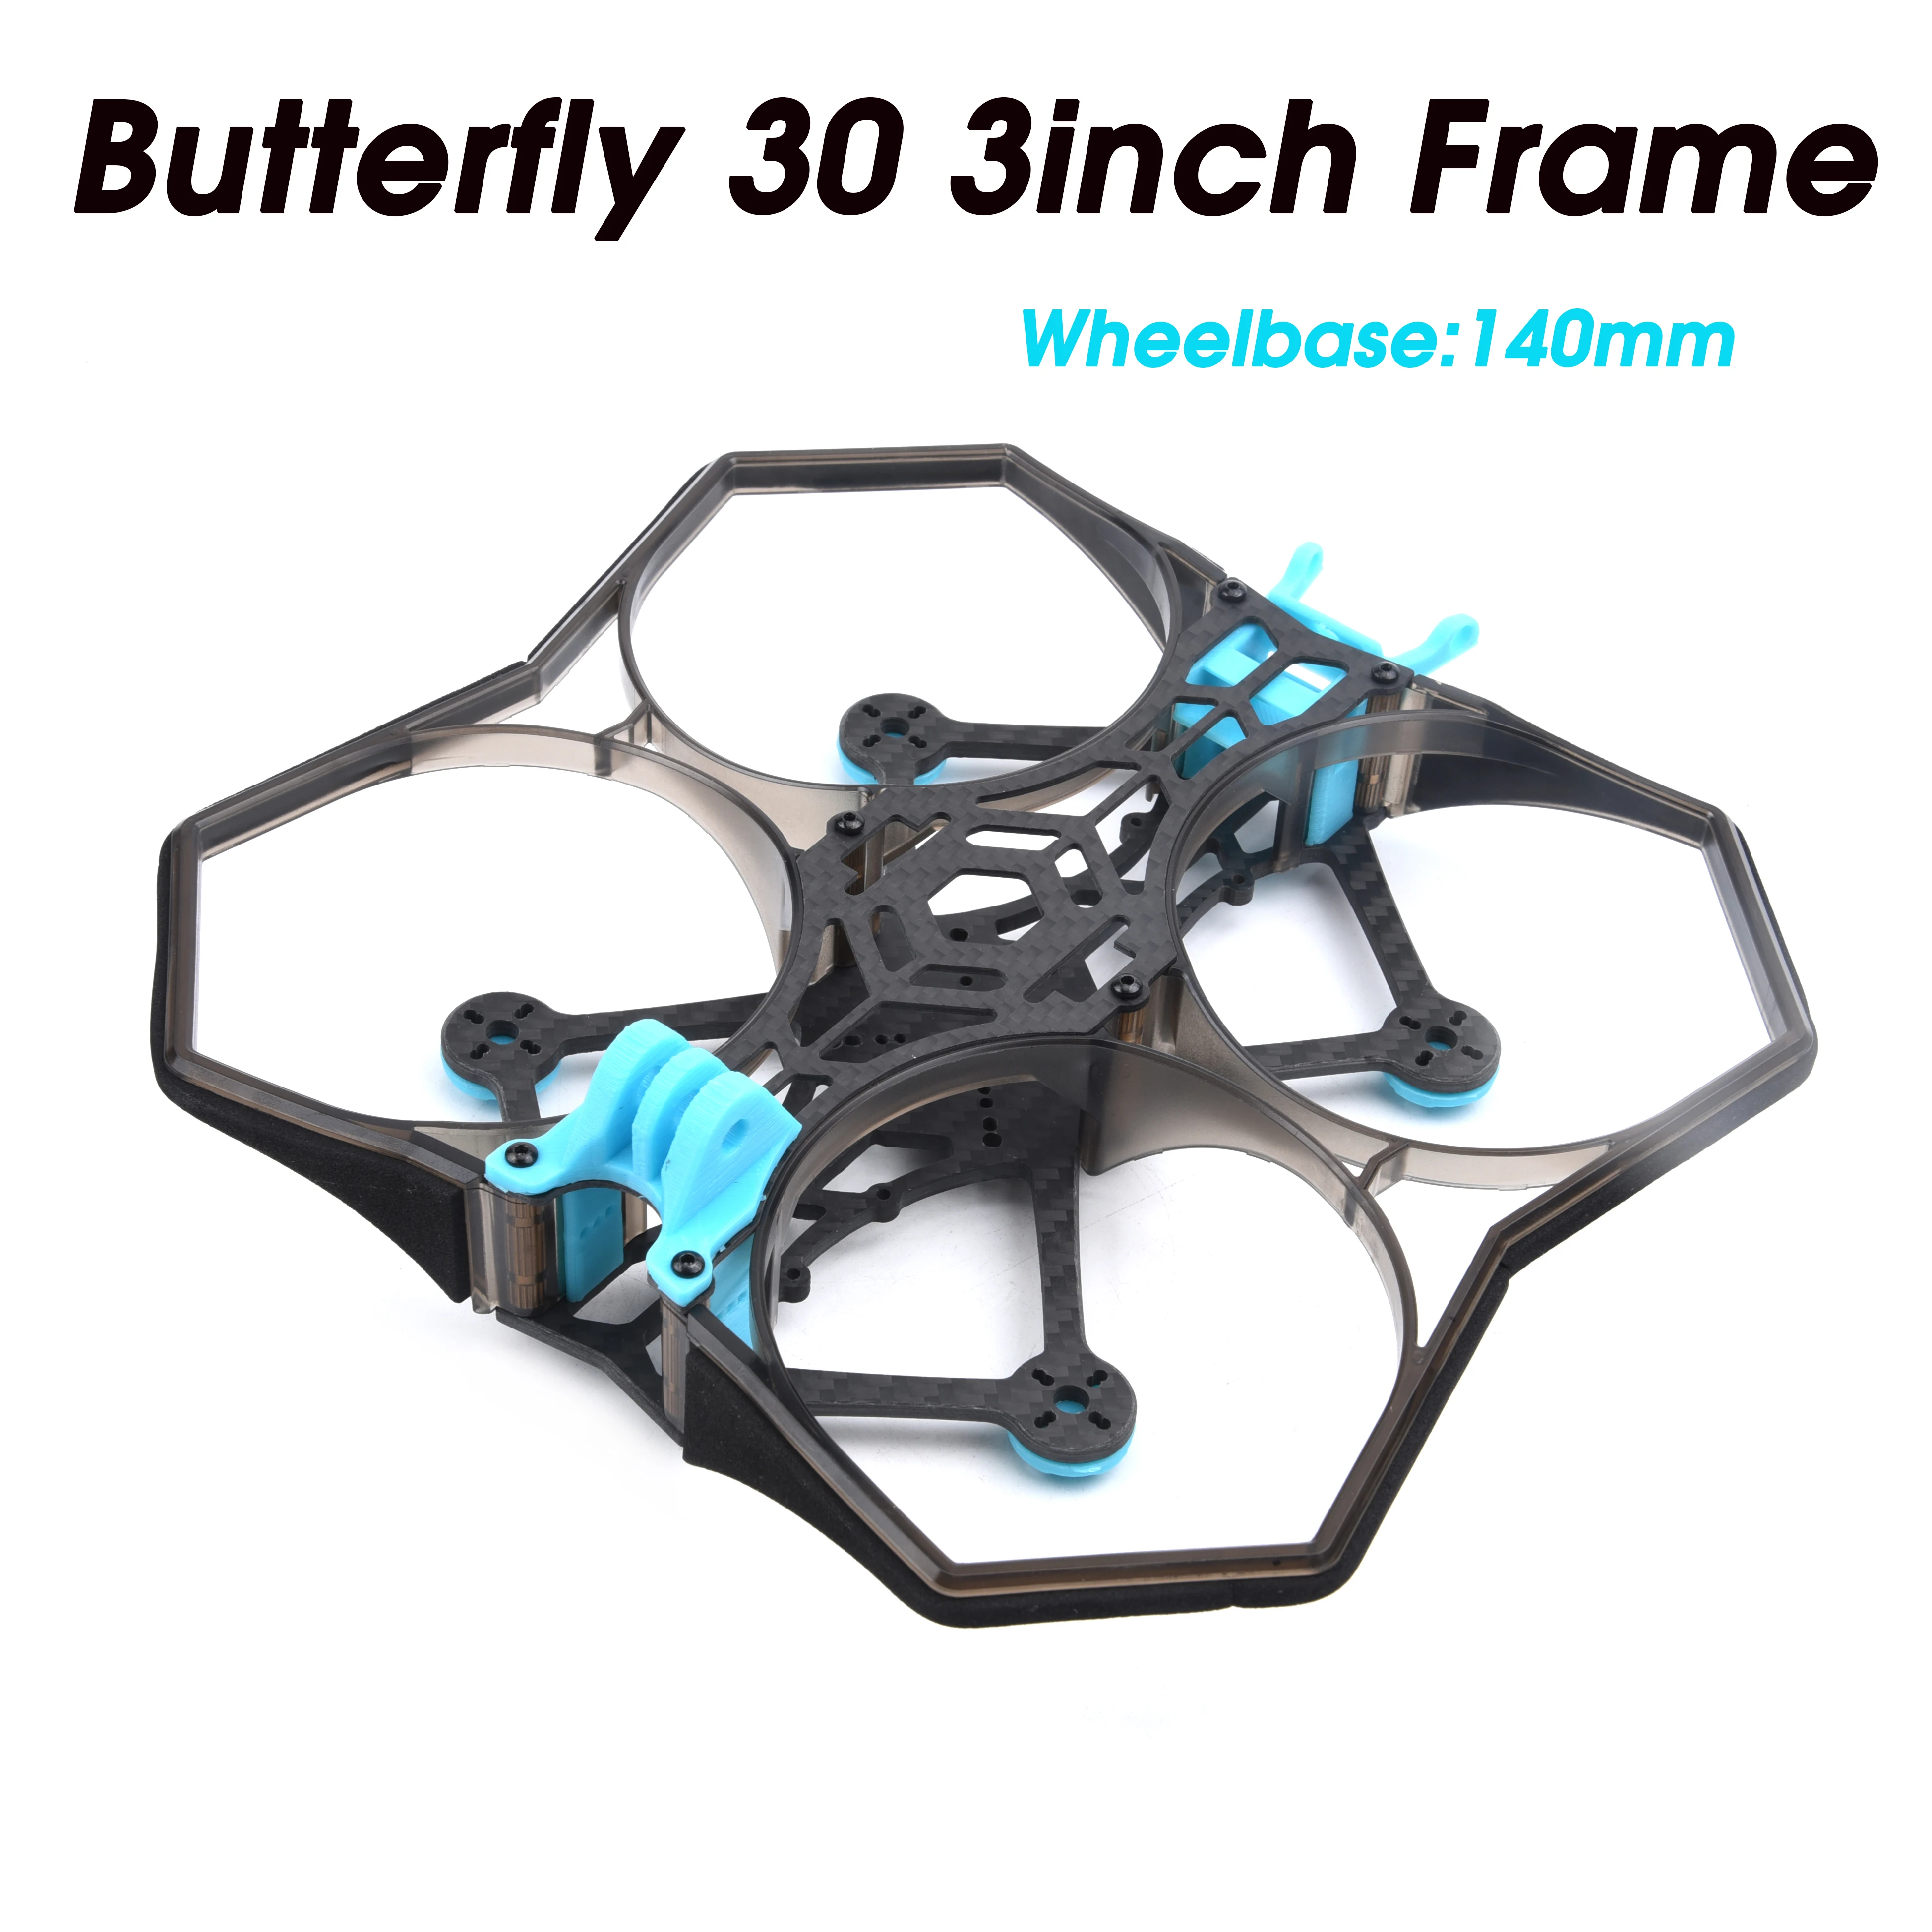 

Butterfly 30 3inch 140mm 3K Carbon Fiber Frame w/ Propeller Protection Ring for Multi-size Flight Control